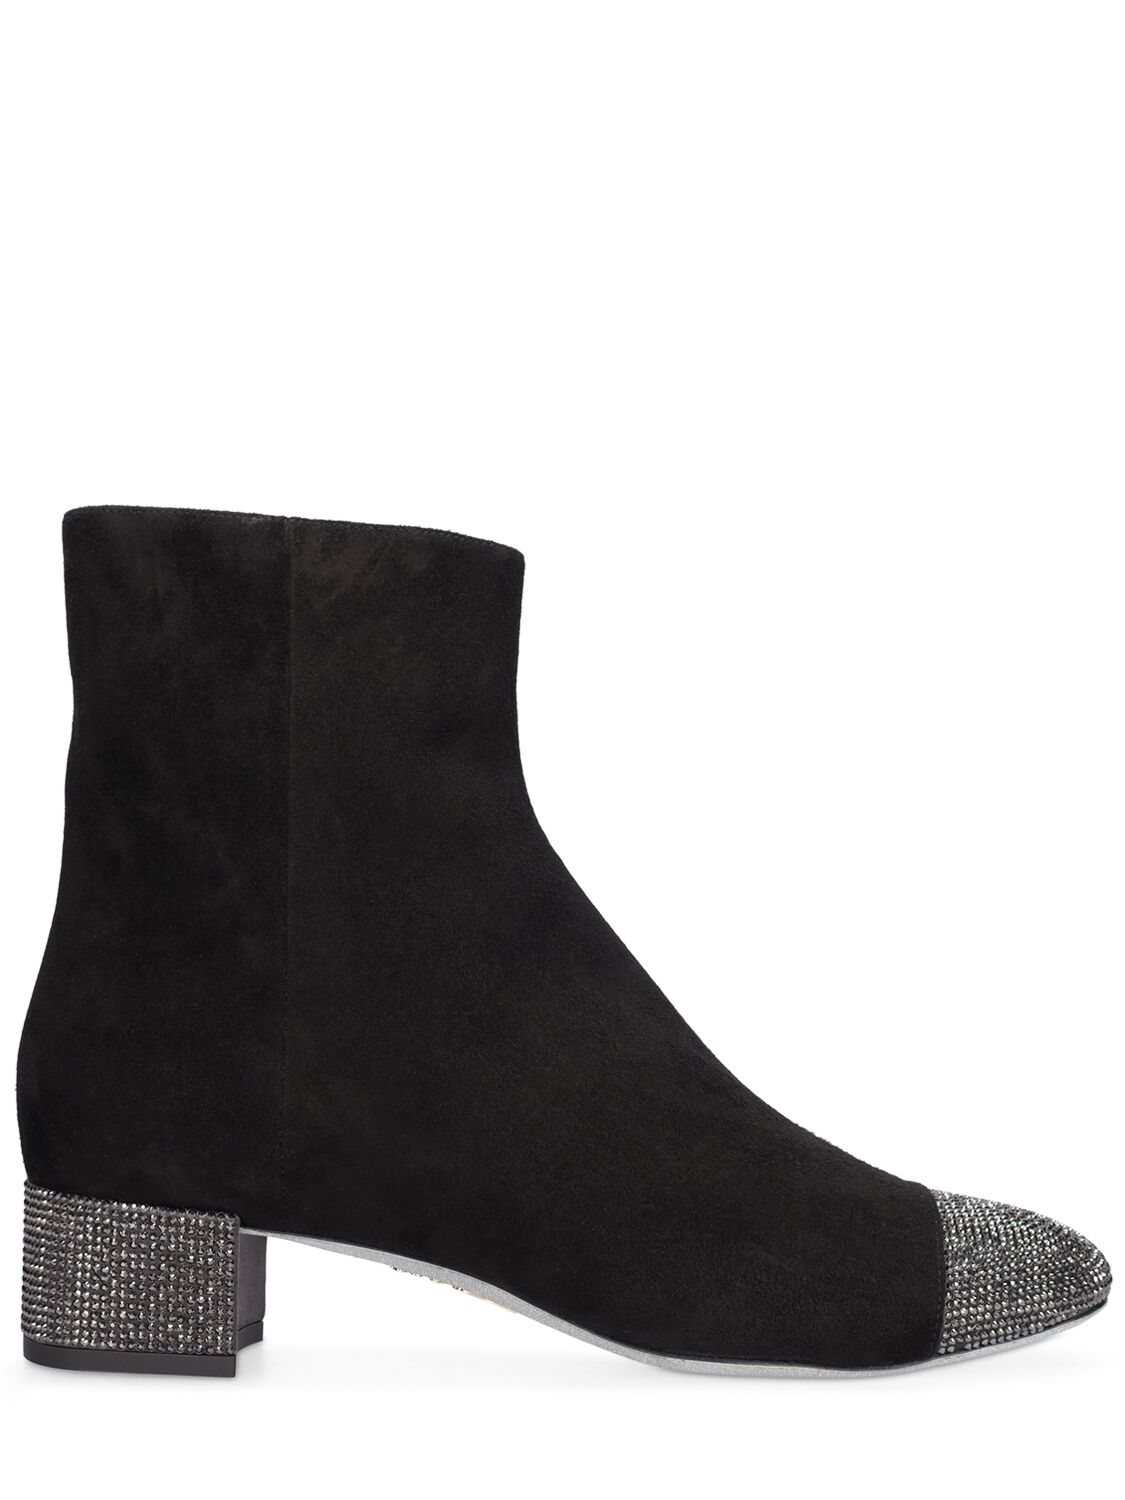 René Caovilla 40mm Suede & Crystals Ankle Boots In Black